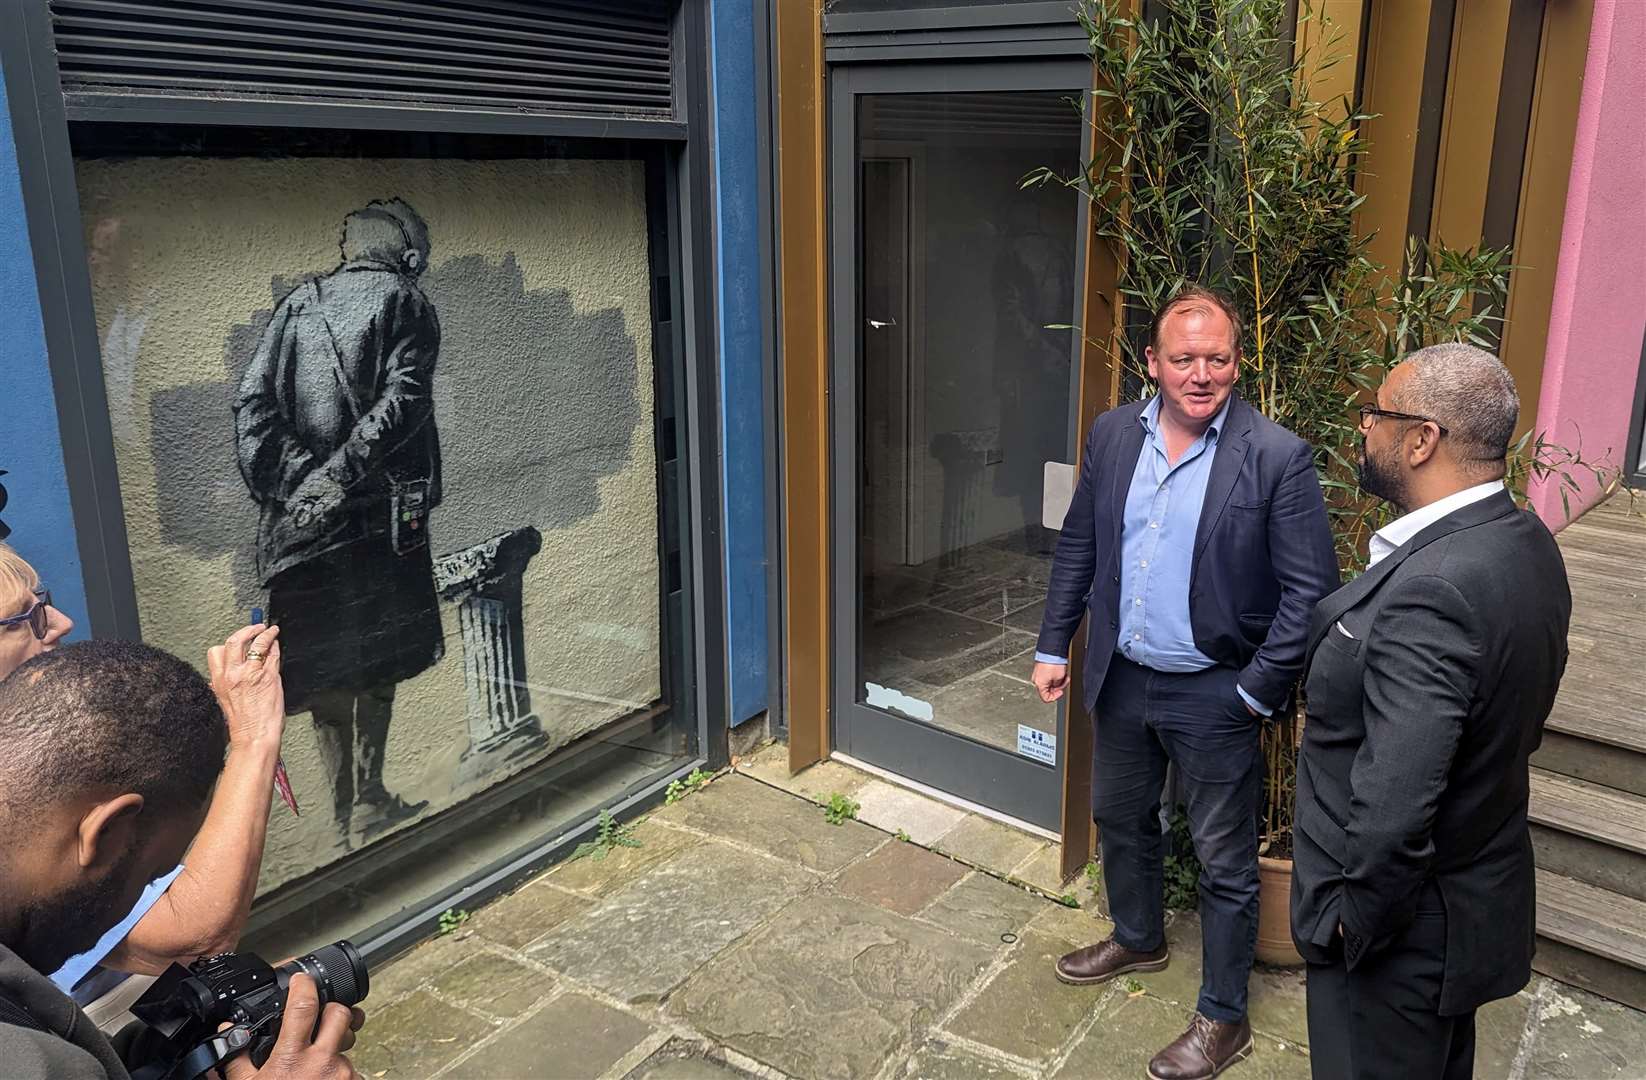 Damian Collins shows James Cleverly the Banksy artwork in Folkestone’s Old High Street